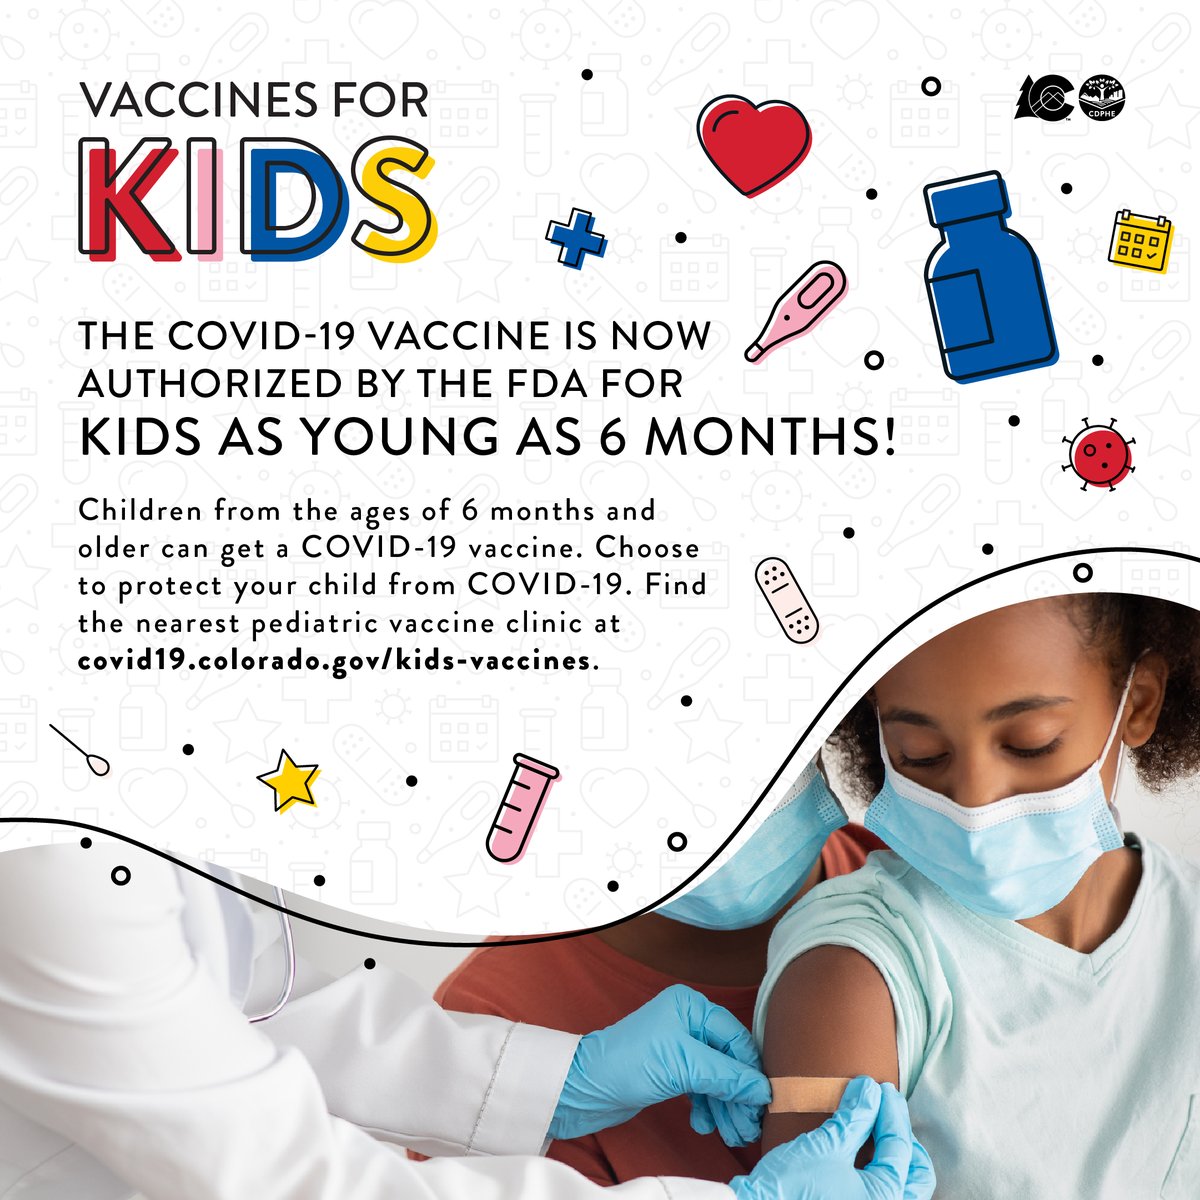 test Twitter Media - COVID vaccines are approved for children as young as 6 months. They can be given at the same time as other routine childhood vaccines. Plus, caregivers are entitled to paid time off from work to take their children to get vaccinated and for recovery time. https://t.co/XsMAnXXylx https://t.co/eb1qaFYR2A